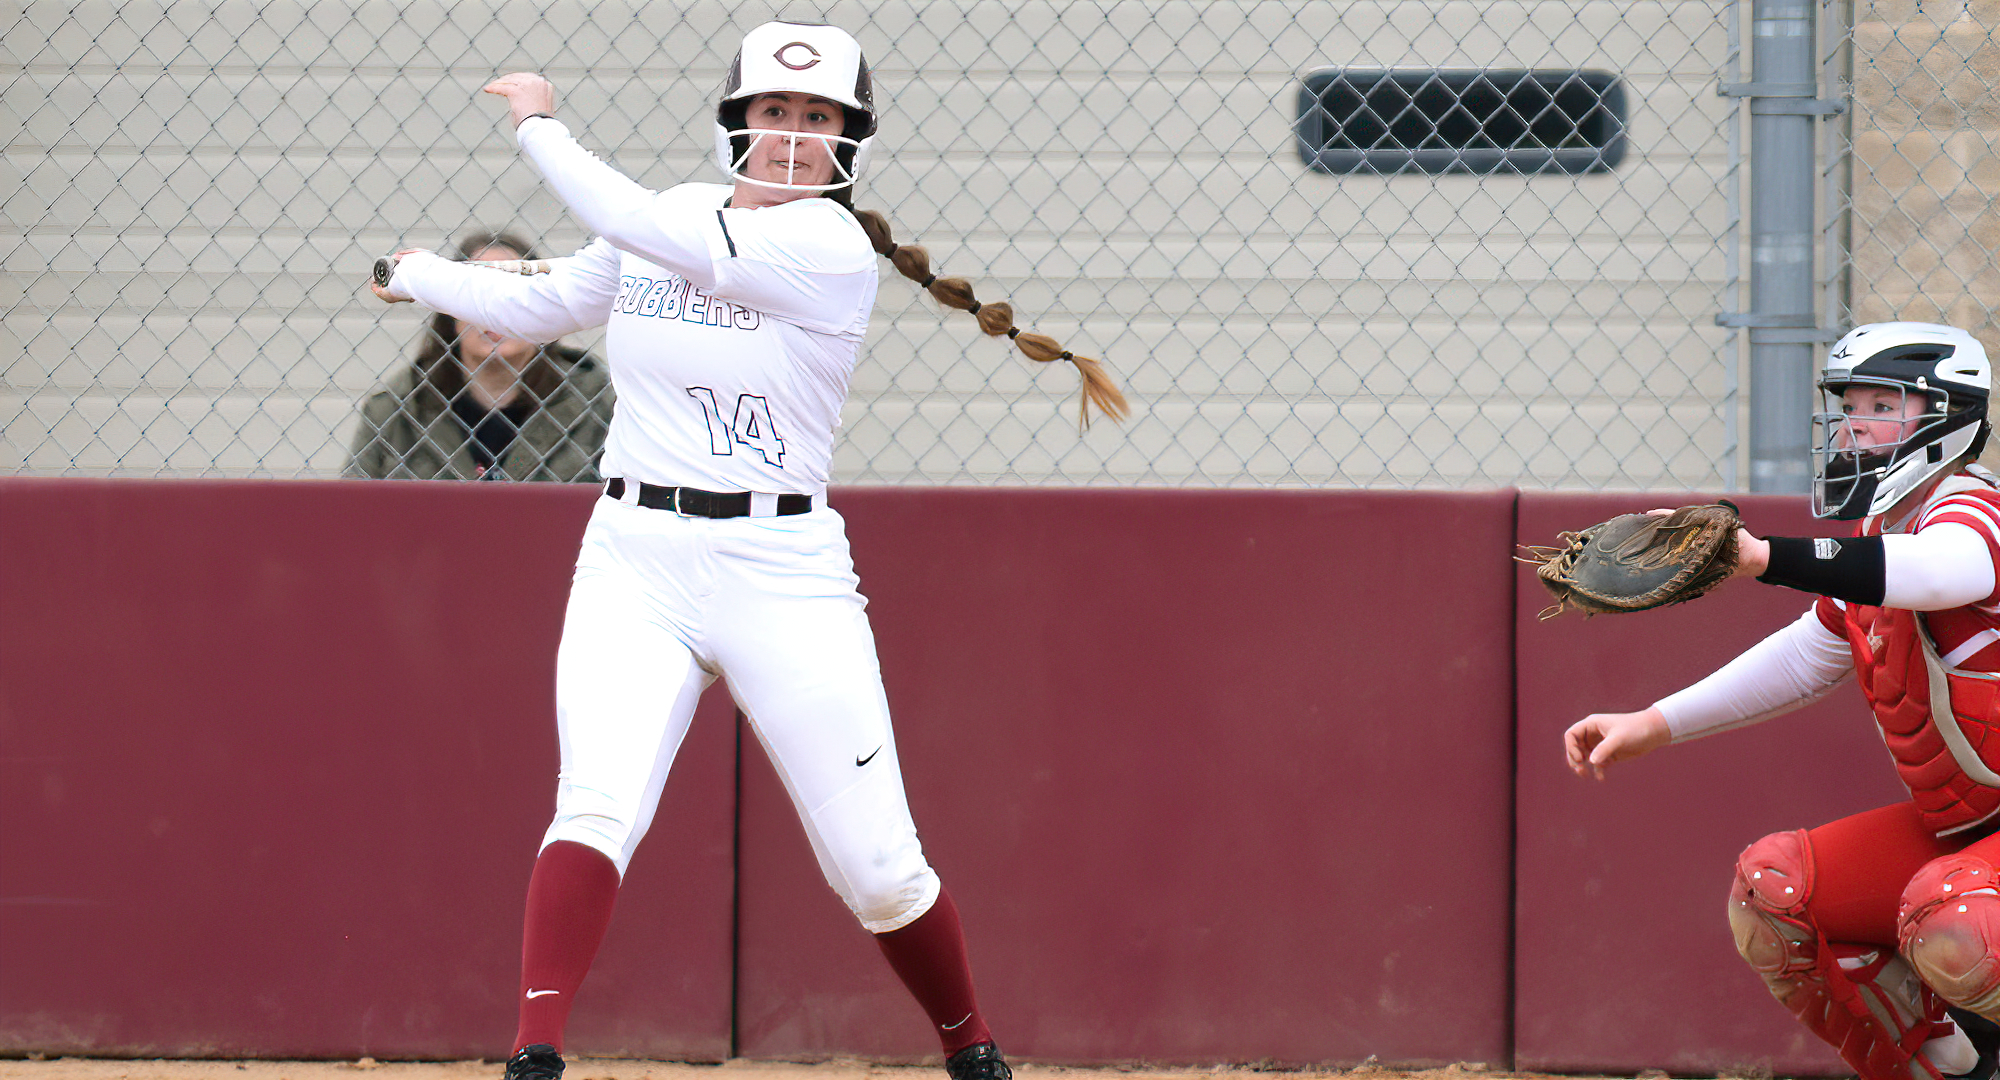 Senior Kate Wensloff went 3-for-3 with a double and an RBI in the second game of the Cobbers' doubleheader at Hamline.